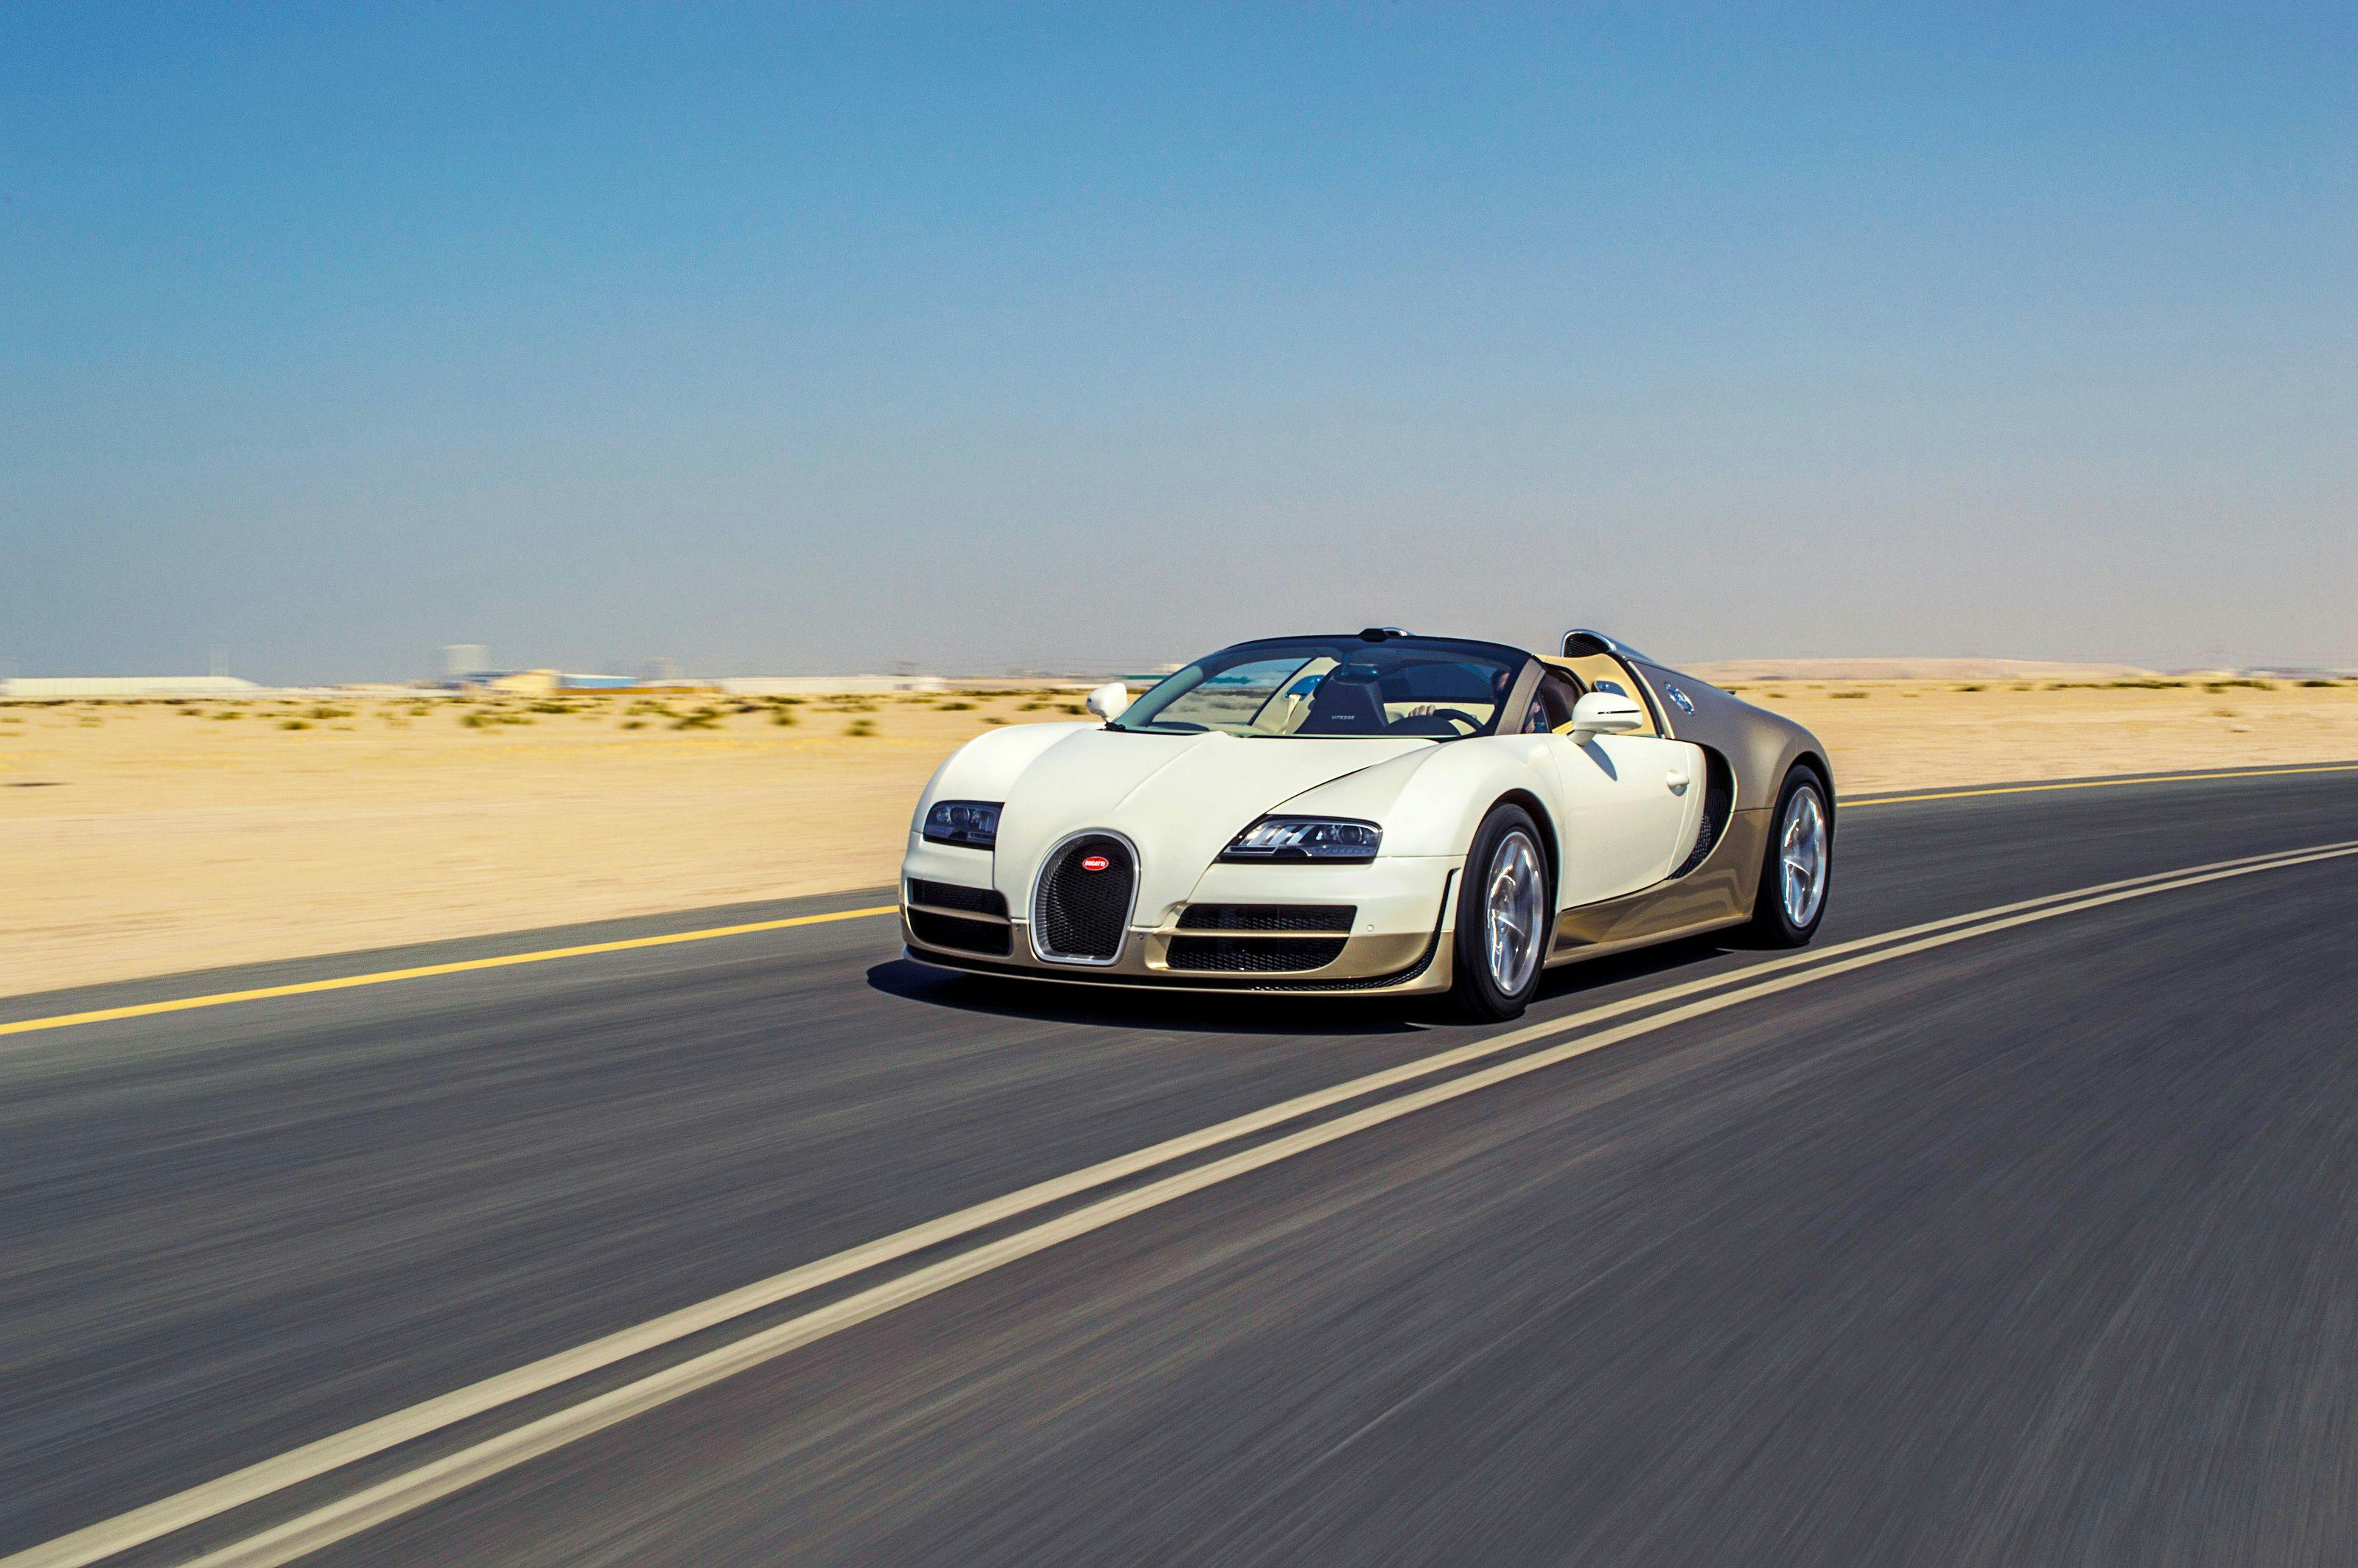 Bugatti awards its Dubai dealership with the title “Service Partner of Excellence”